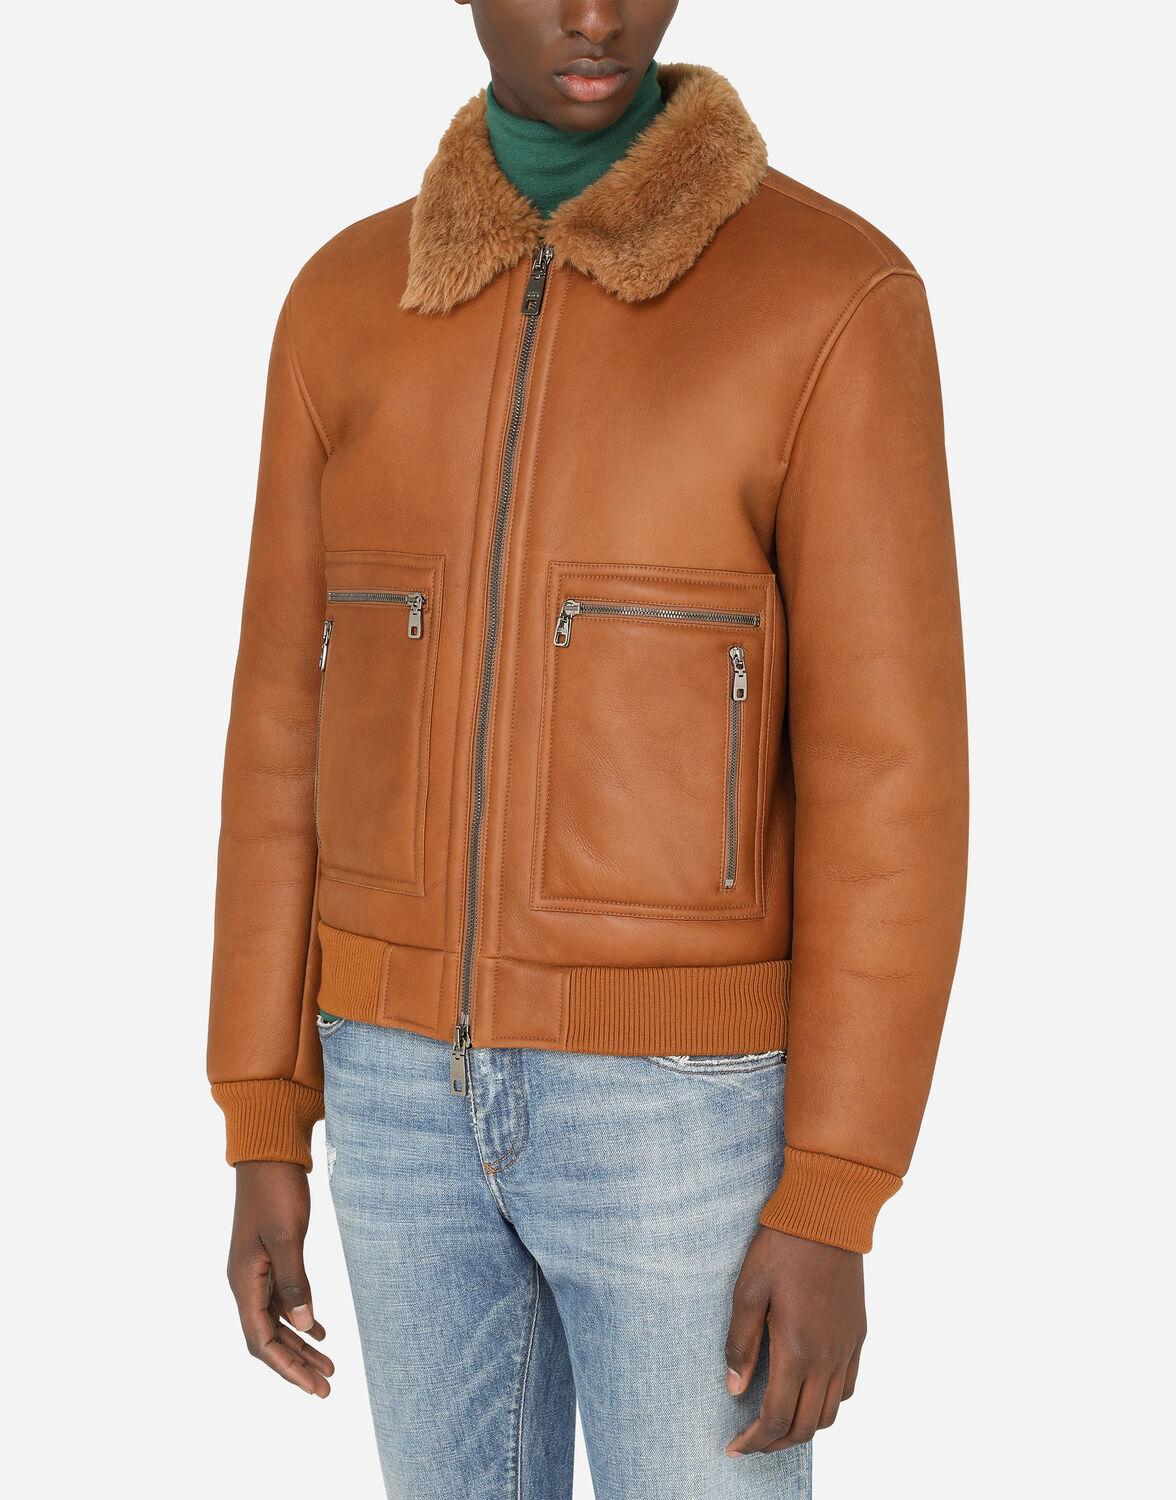 Dolce & Gabbana Leather Shearling Jacket for Men - Lyst